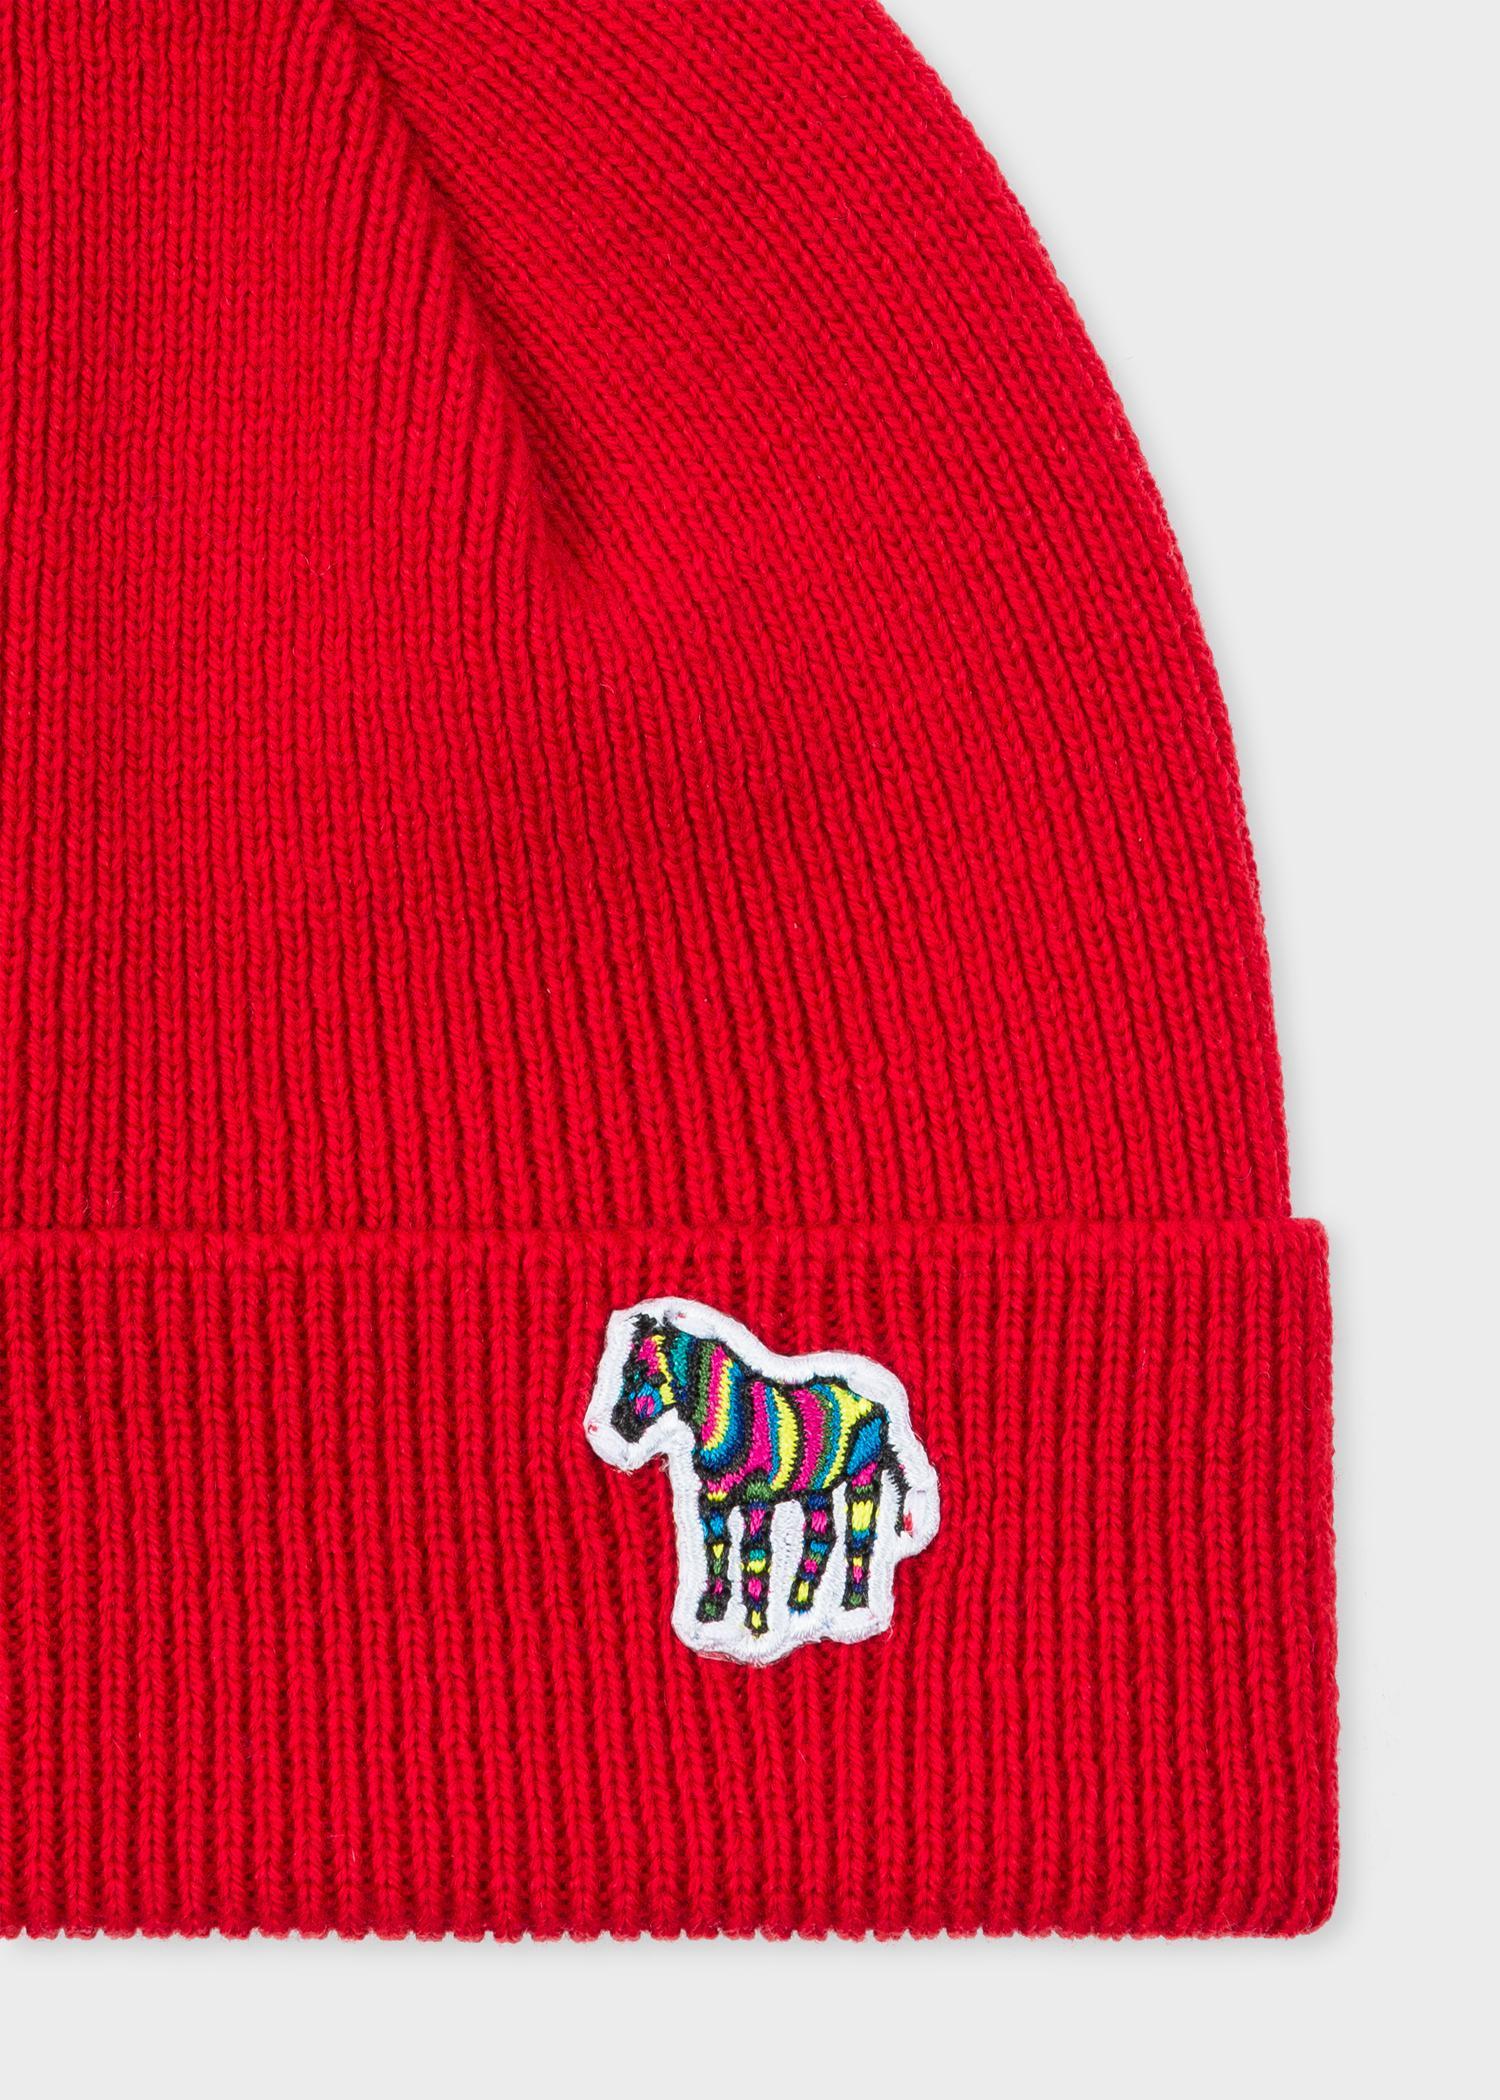 Red Zebra Logo - Paul Smith Red 'Zebra' Logo Ribbed Lambswool Beanie Hat in Red for ...